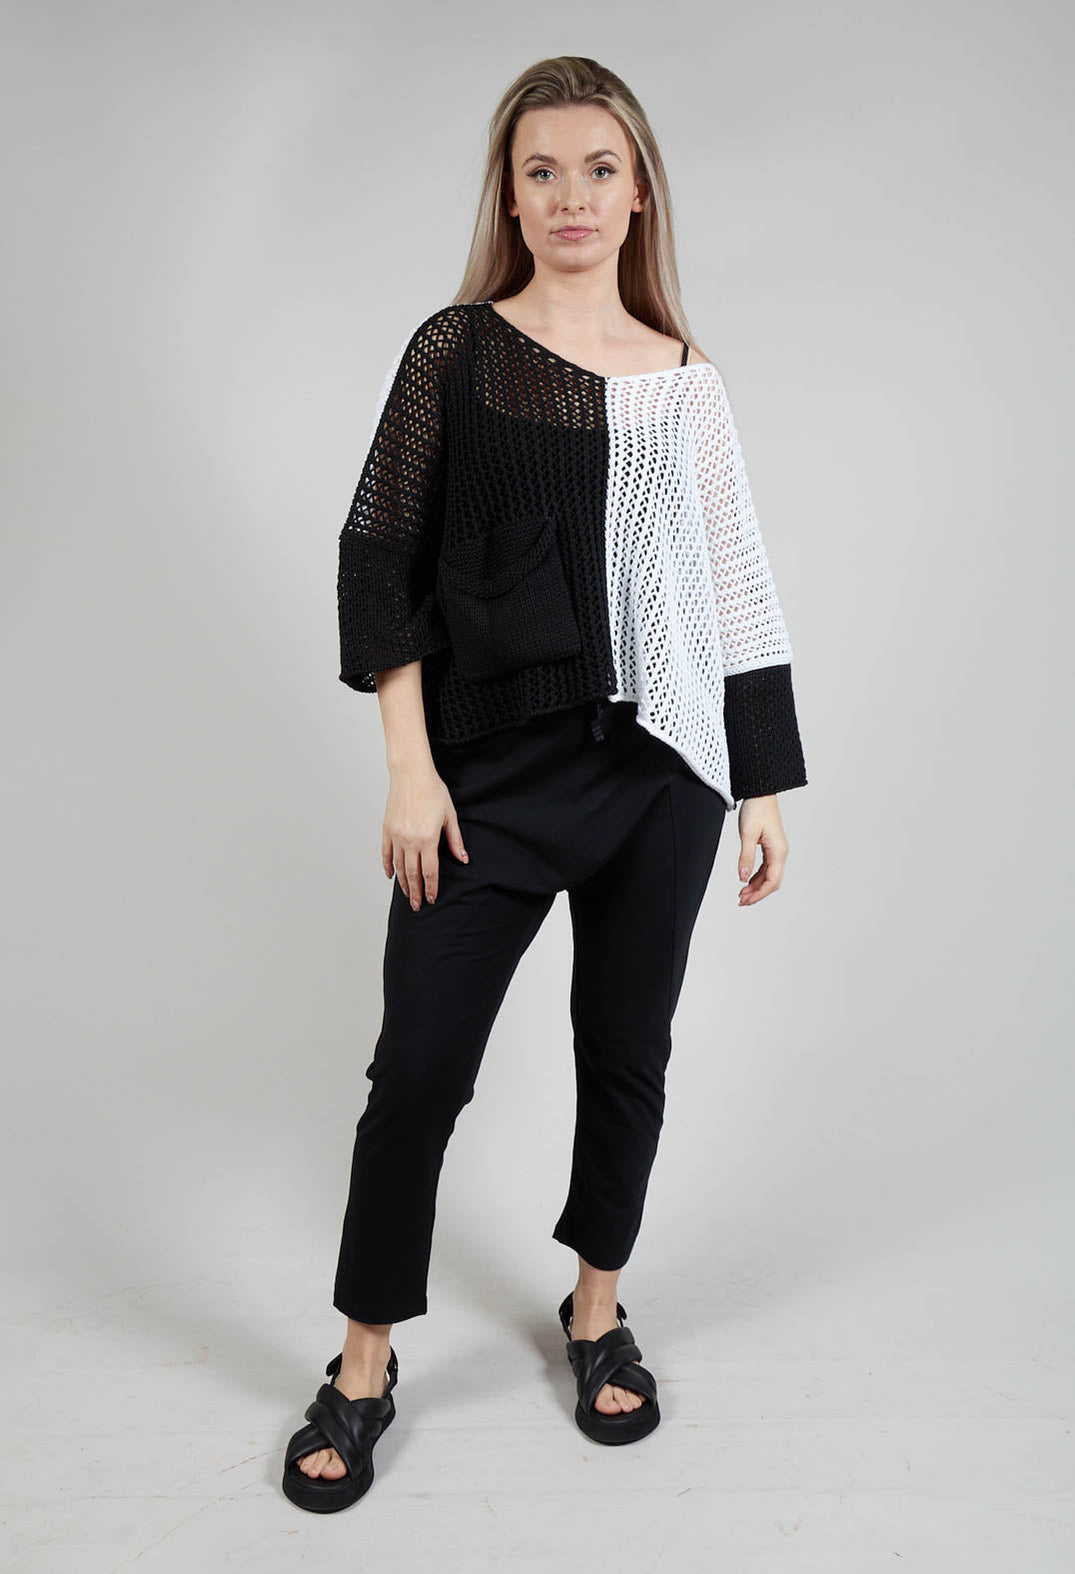 Crocheted Top in Black and White